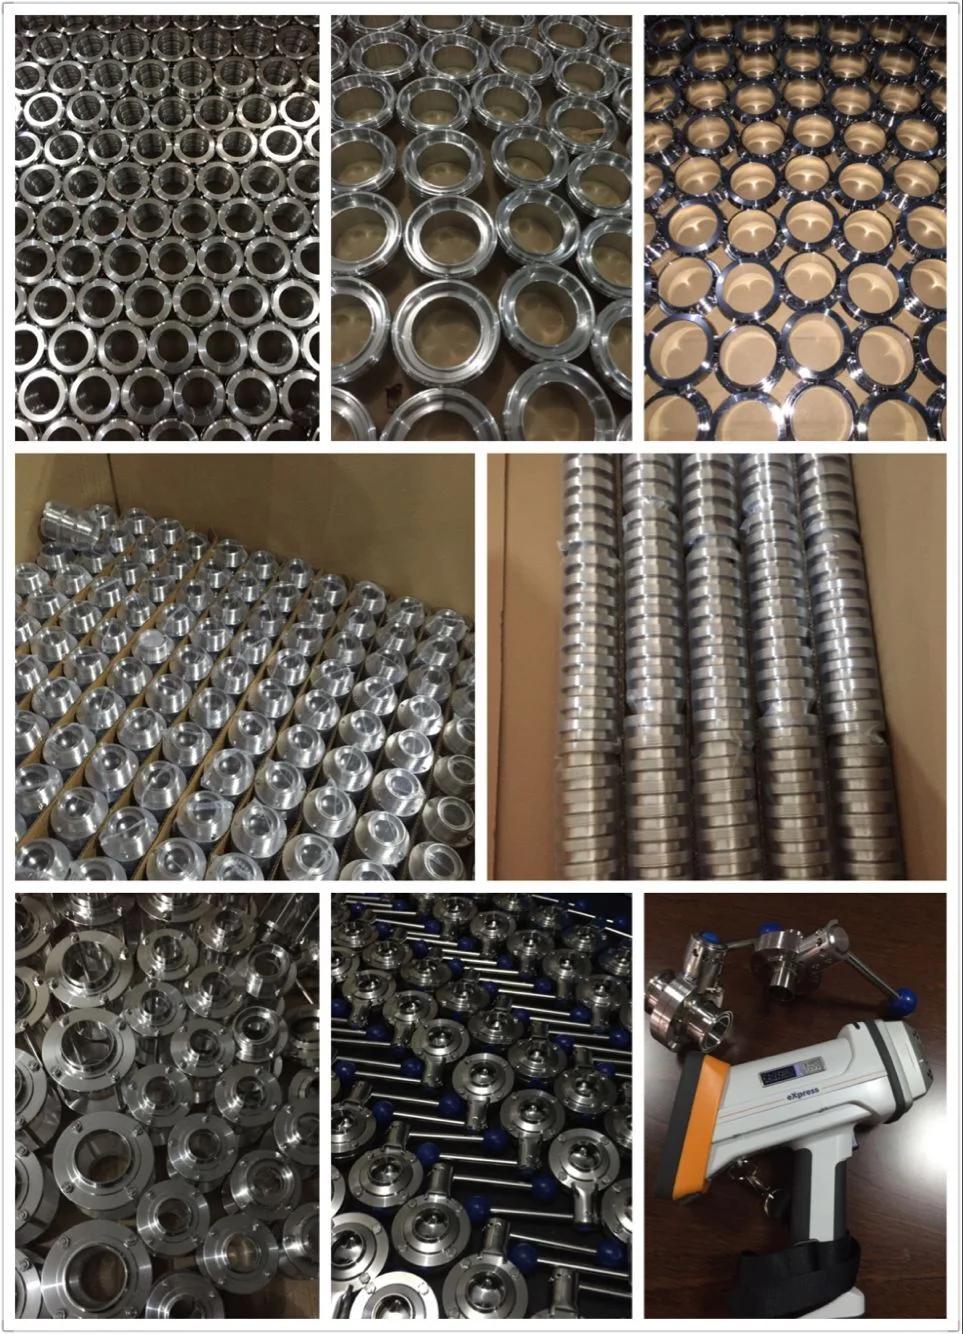 SMS/Rjt/3A /BS Stainless Steel SUS304 Sanitation Grade Union Parts Male/Liner/Nut